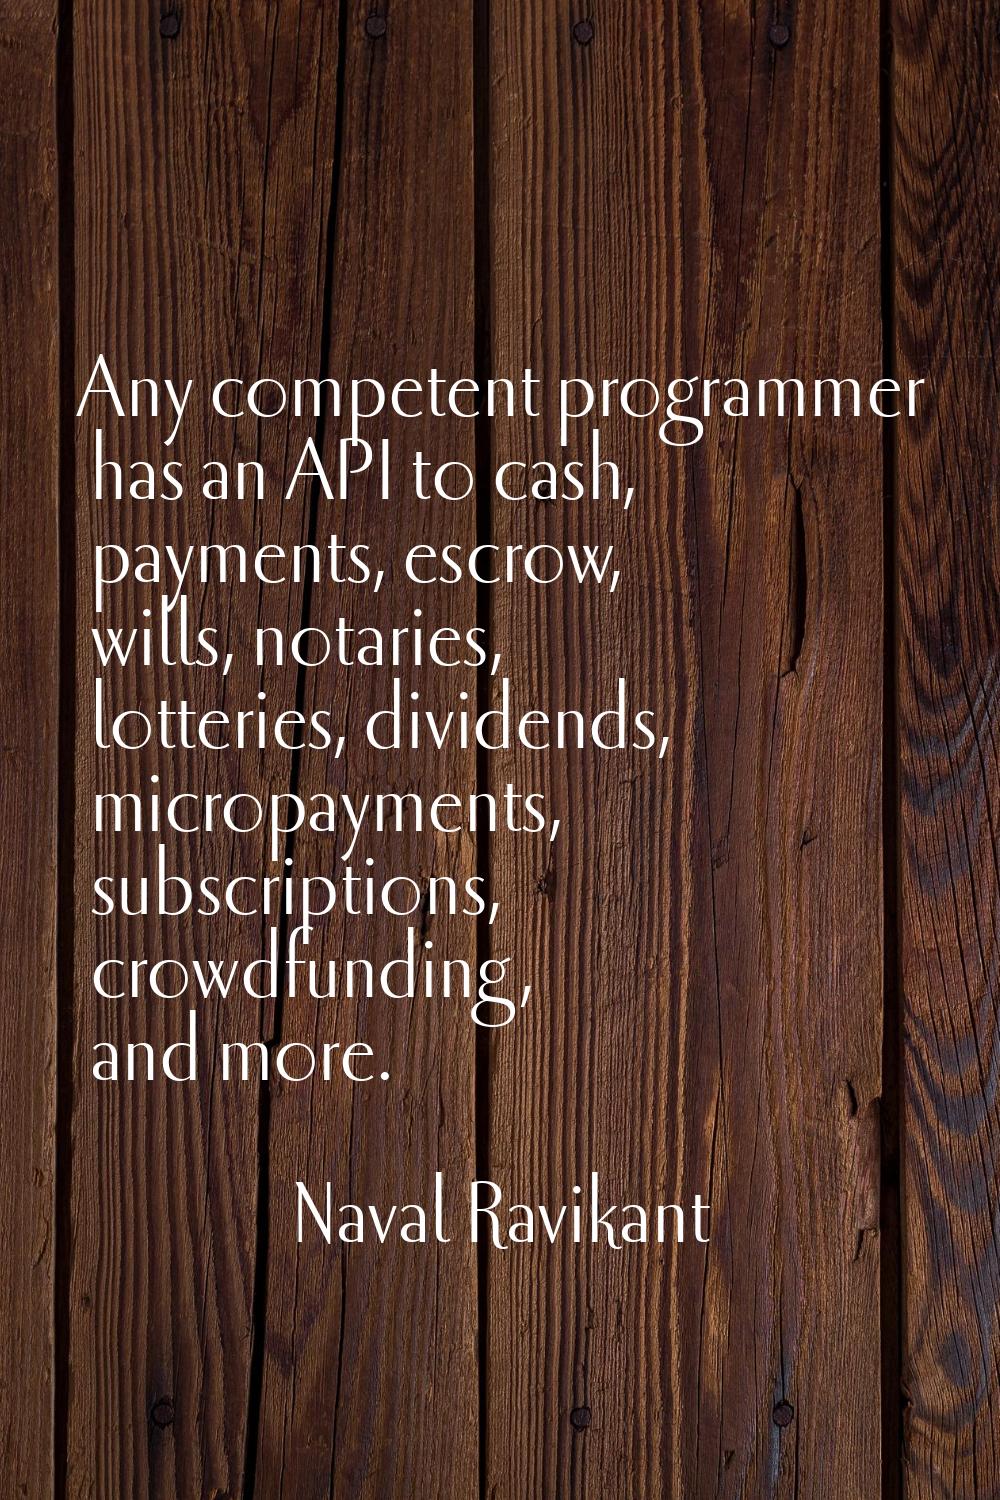 Any competent programmer has an API to cash, payments, escrow, wills, notaries, lotteries, dividend